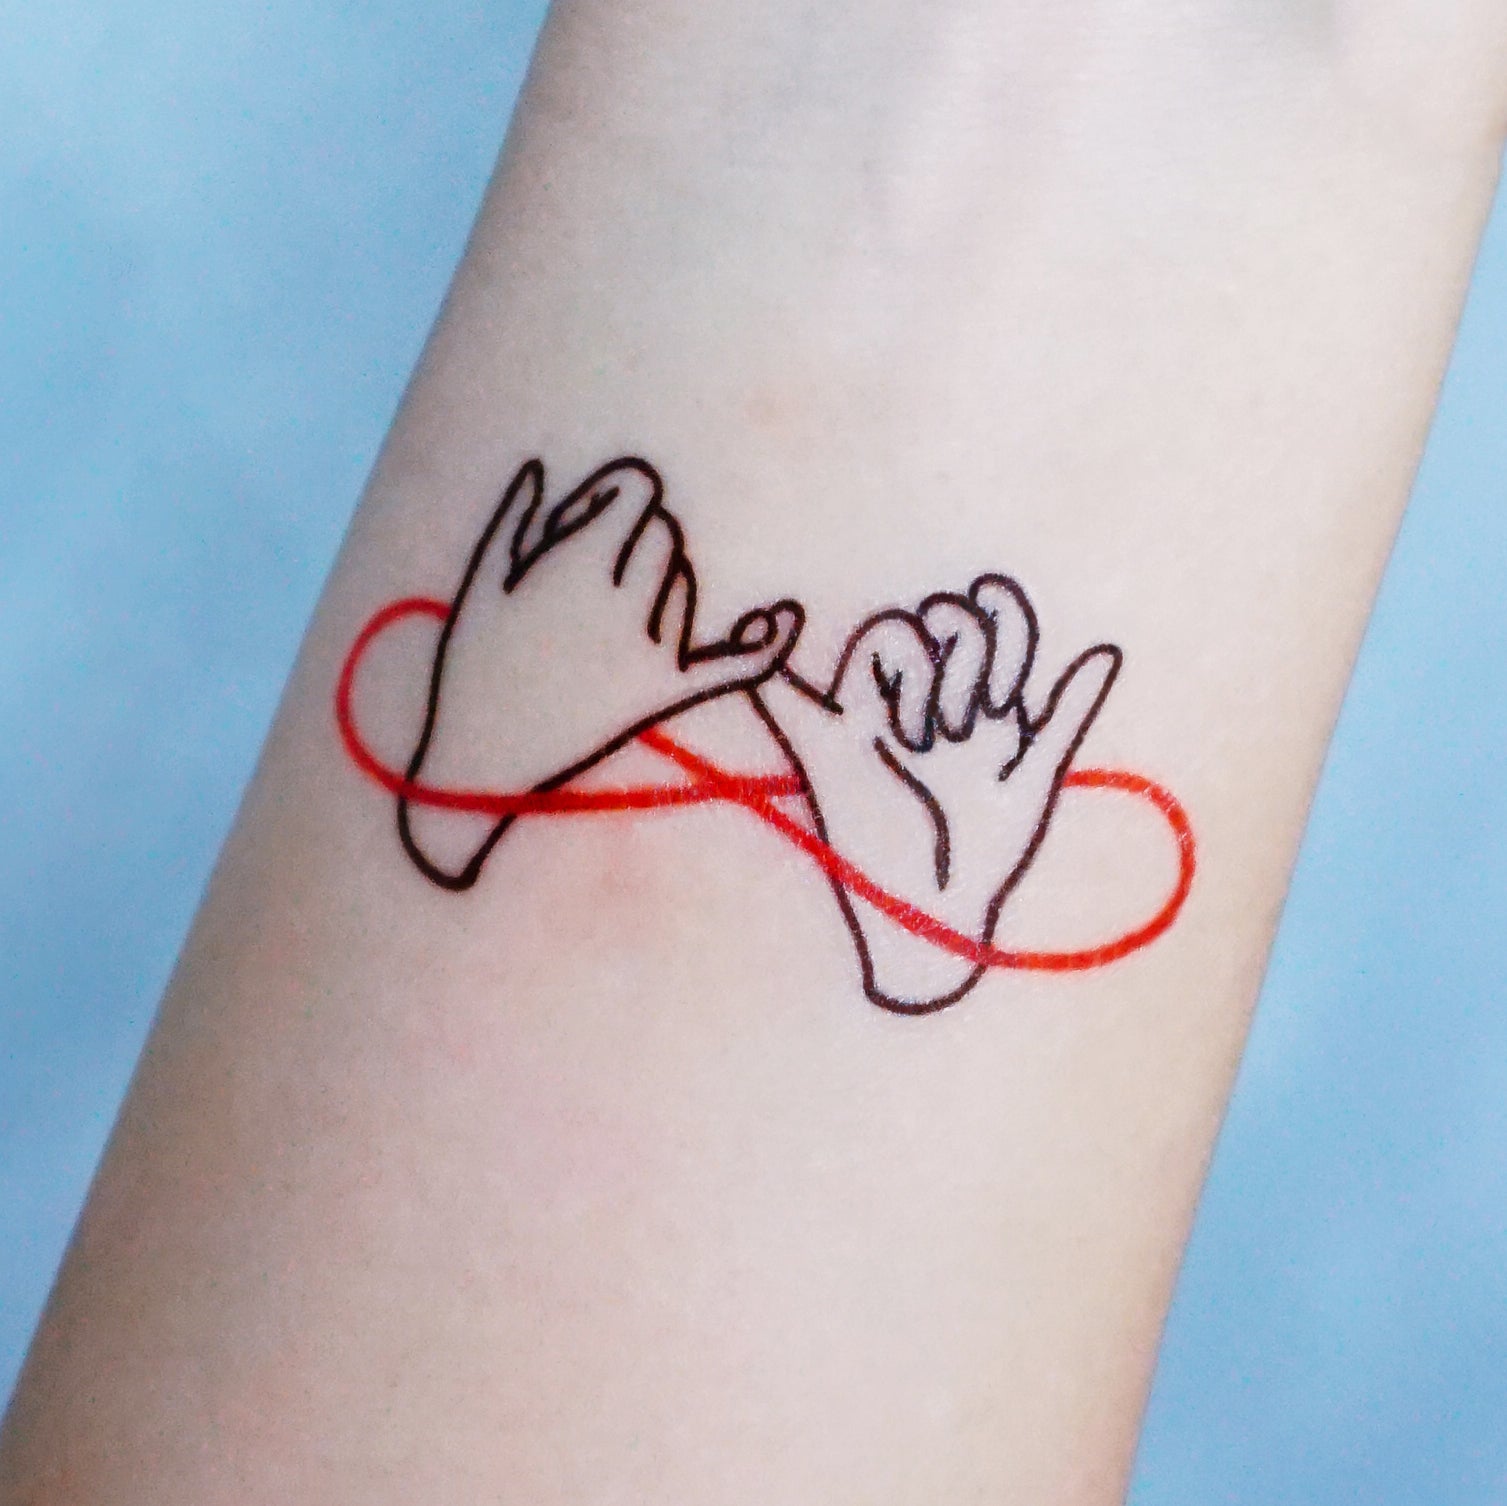 Pinky Promise Temporary Tattoo (Set of 3) – Small Tattoos